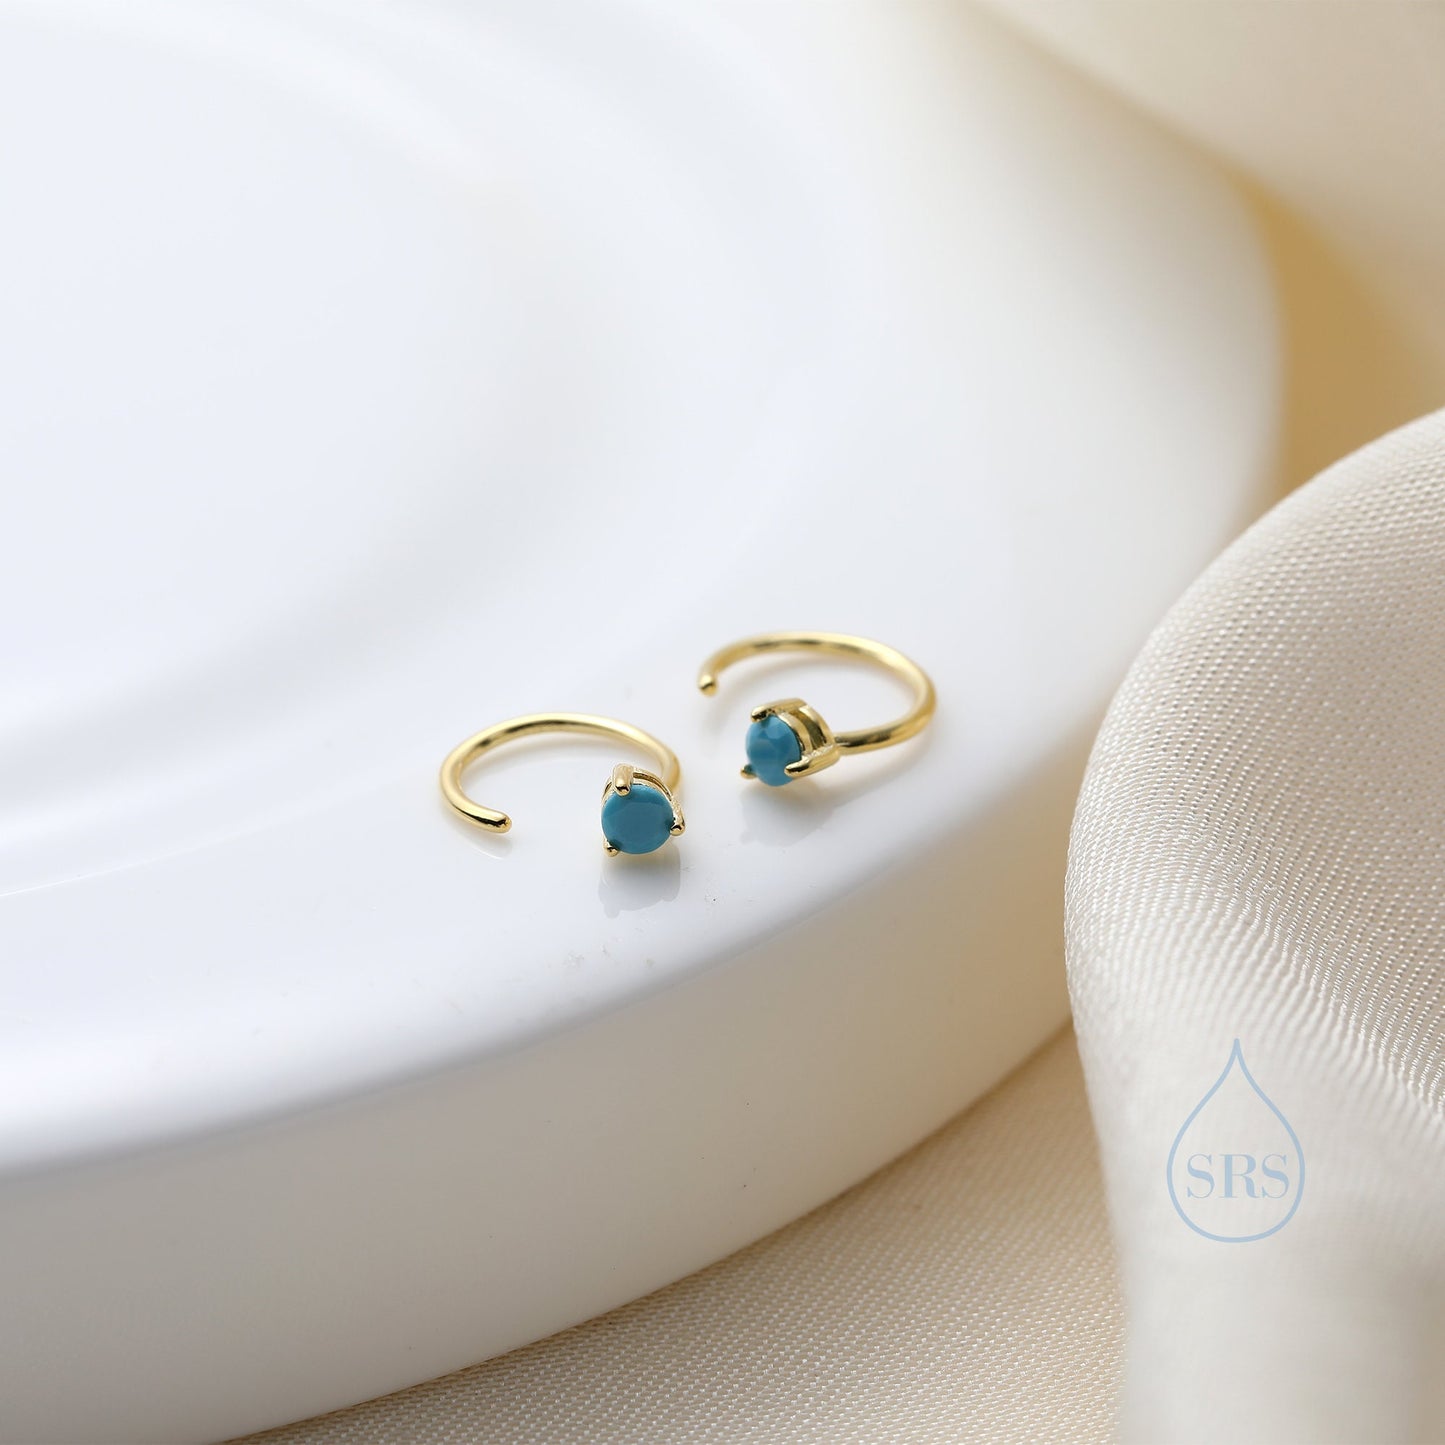 Tiny Turquoise Huggie Hoop Threader Earrings in Sterling Silver, 3mm Three Prong, Gold or Silver, Pull Through Open Hoops, C Shape Hoops